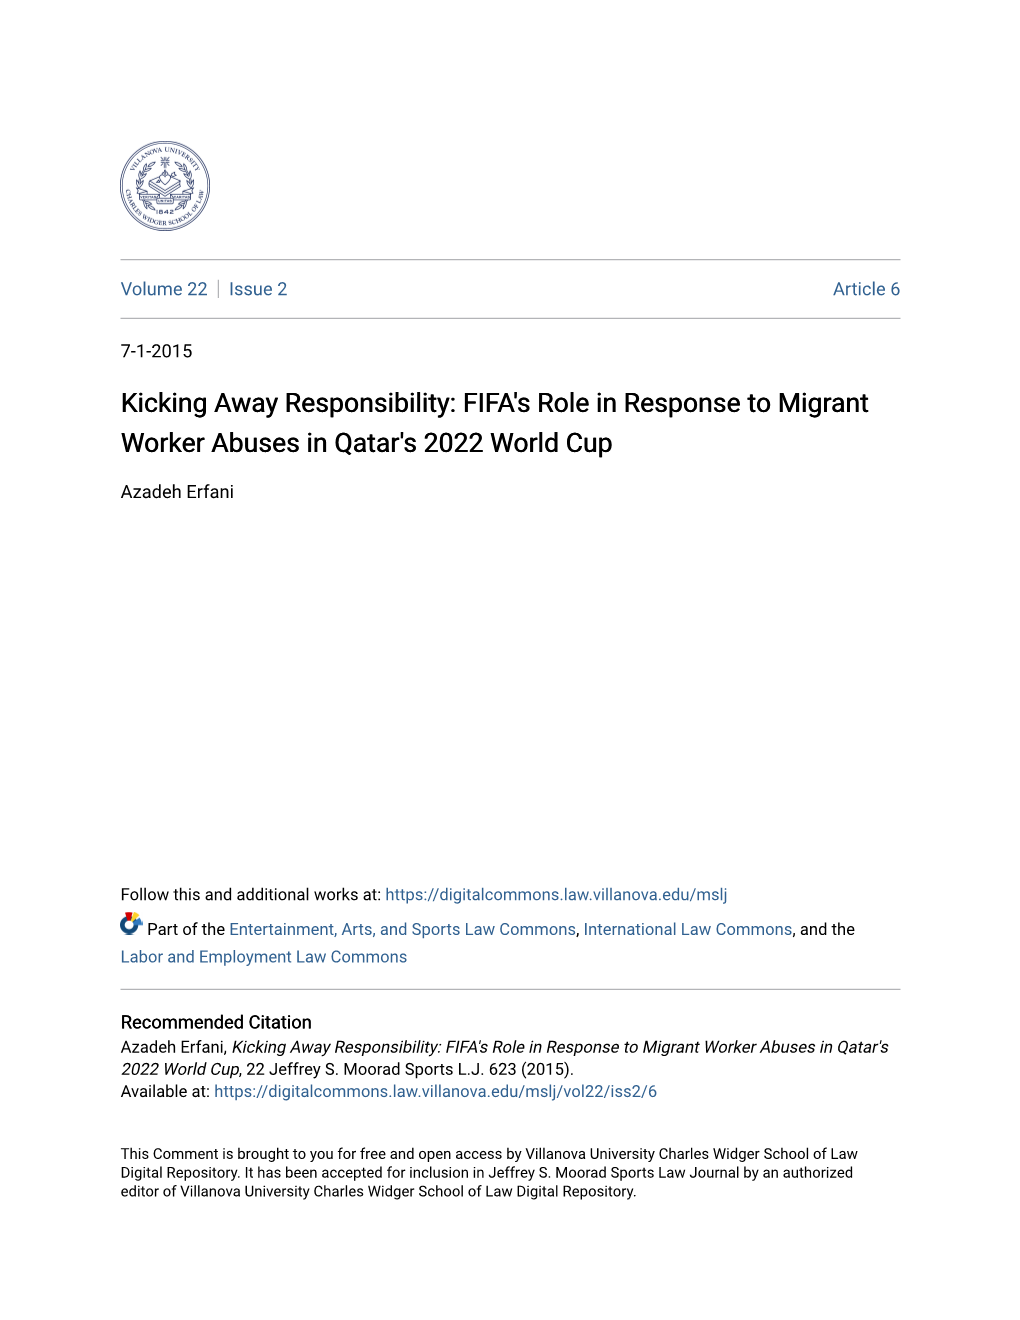 FIFA's Role in Response to Migrant Worker Abuses in Qatar's 2022 World Cup